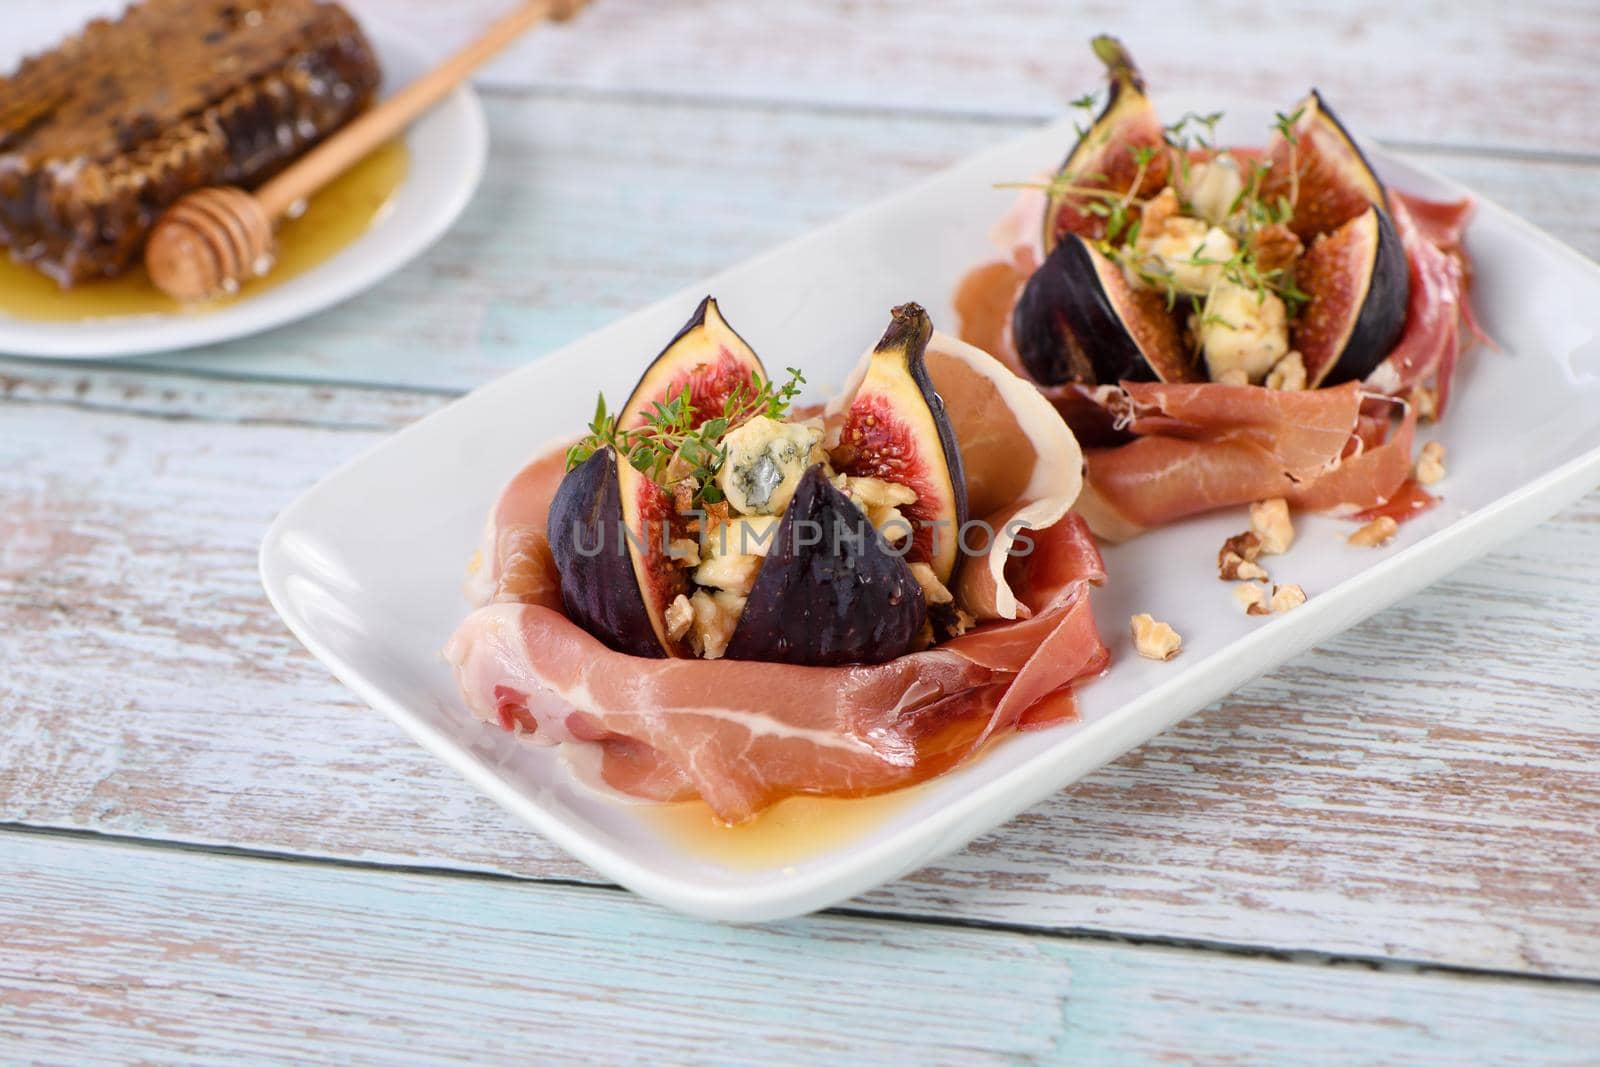 Figs wrapped in Parma ham by Apolonia